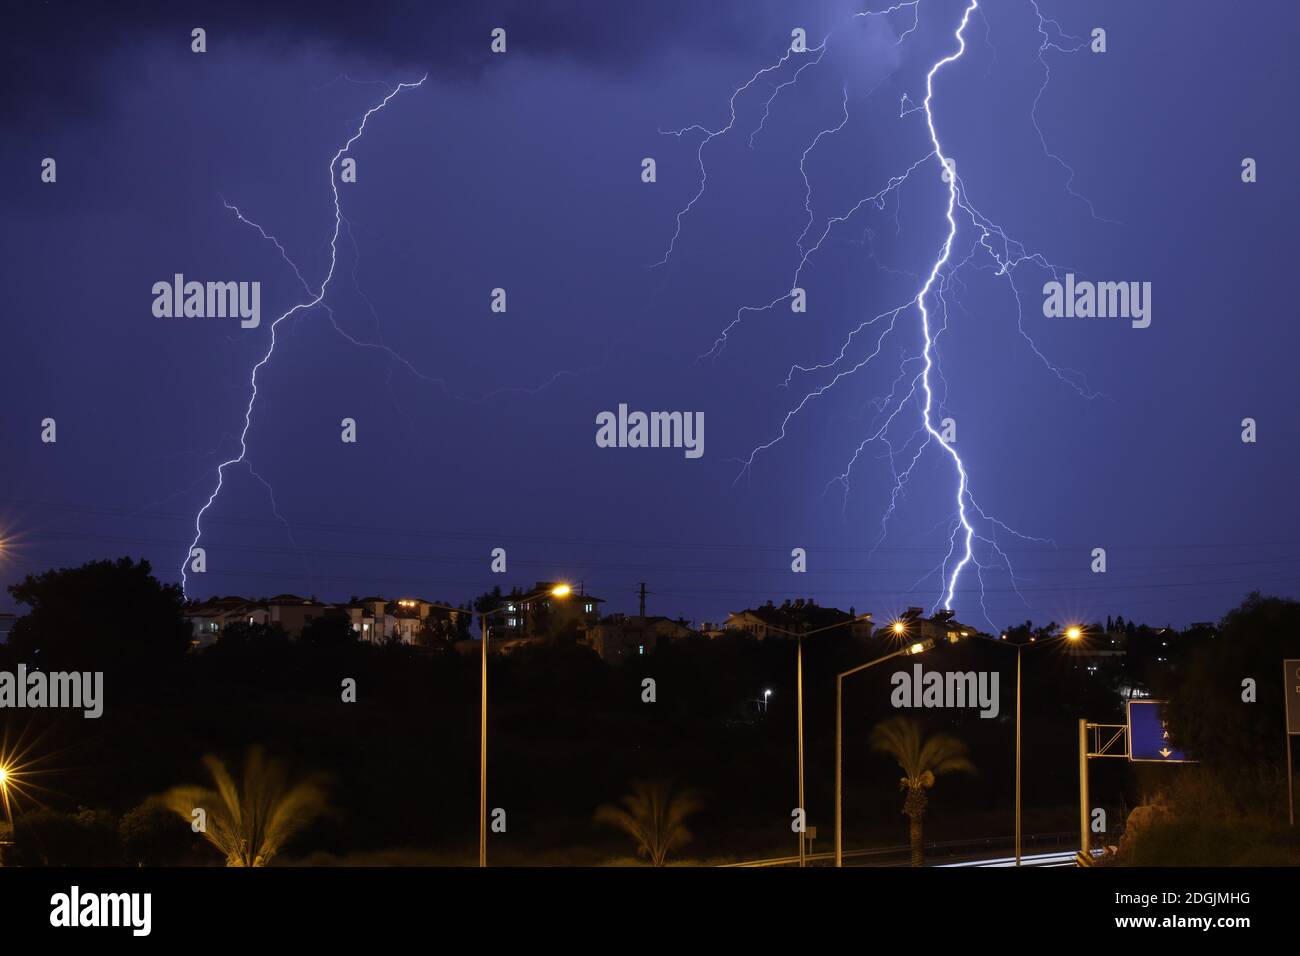 Lightning thunder storm over city in blue night with city lights Stock Photo